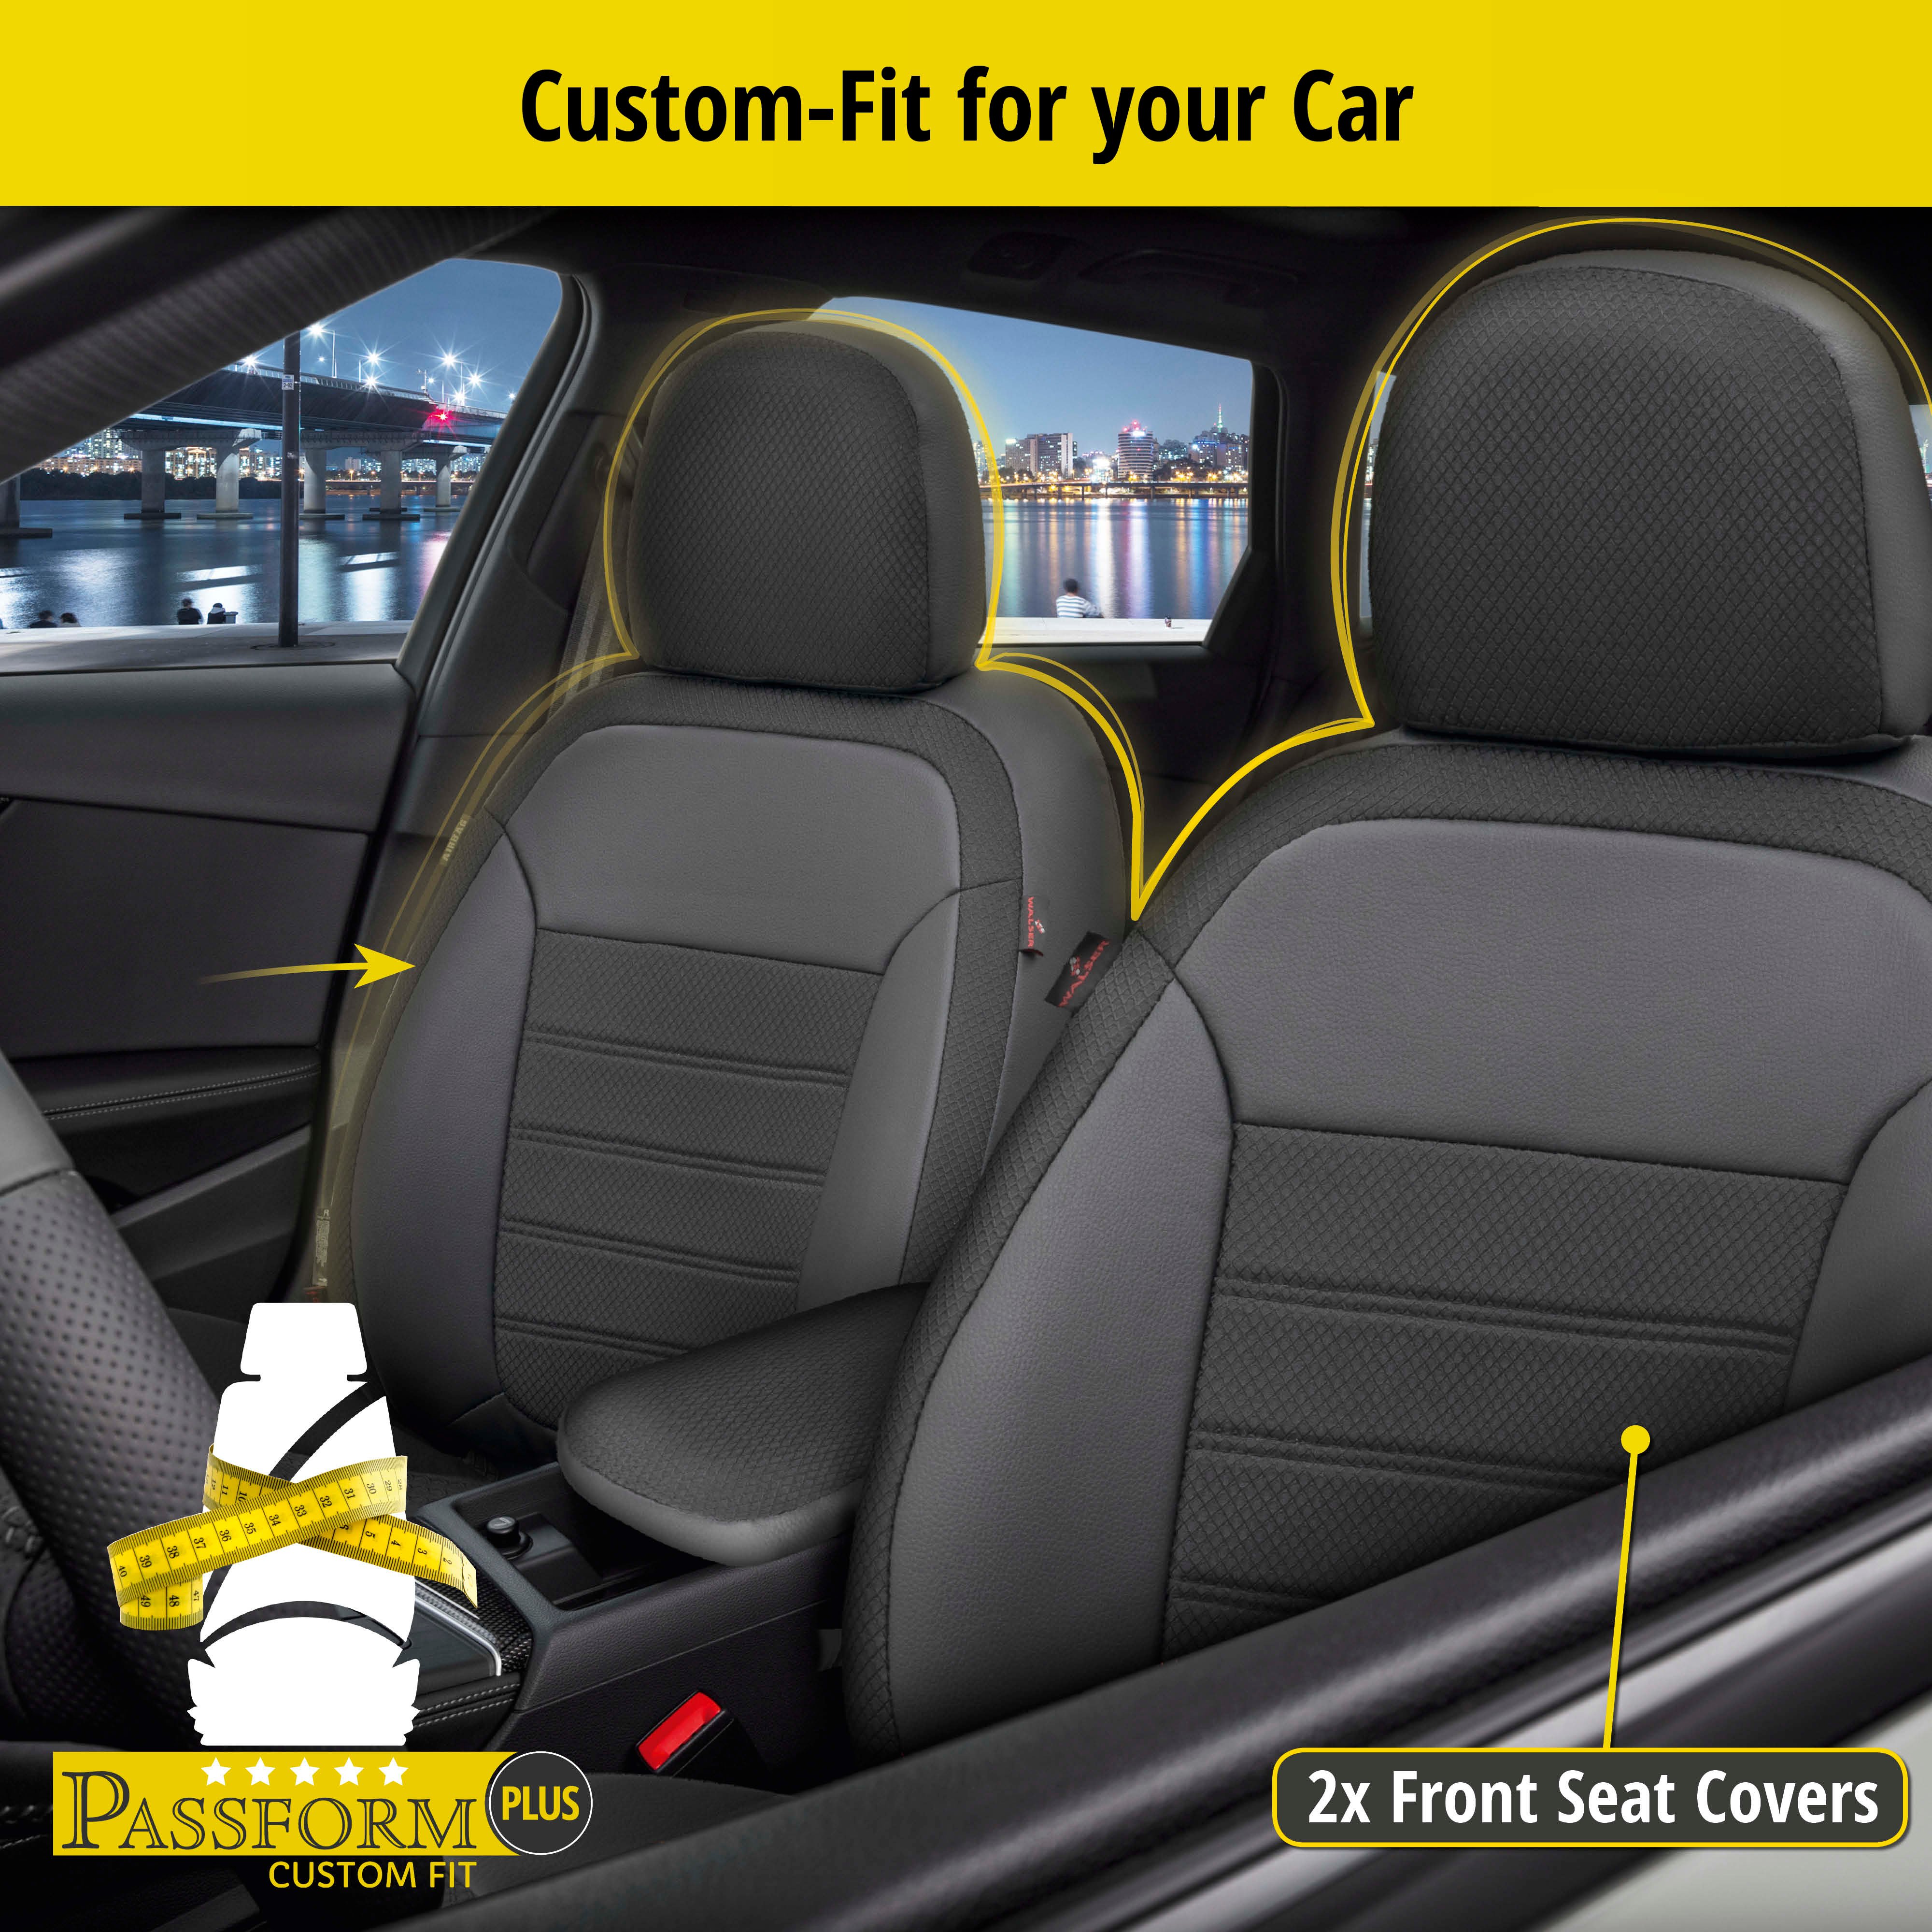 Seat Cover Aversa for Skoda Fabia 2014-Today, 2 seat covers for normal seats